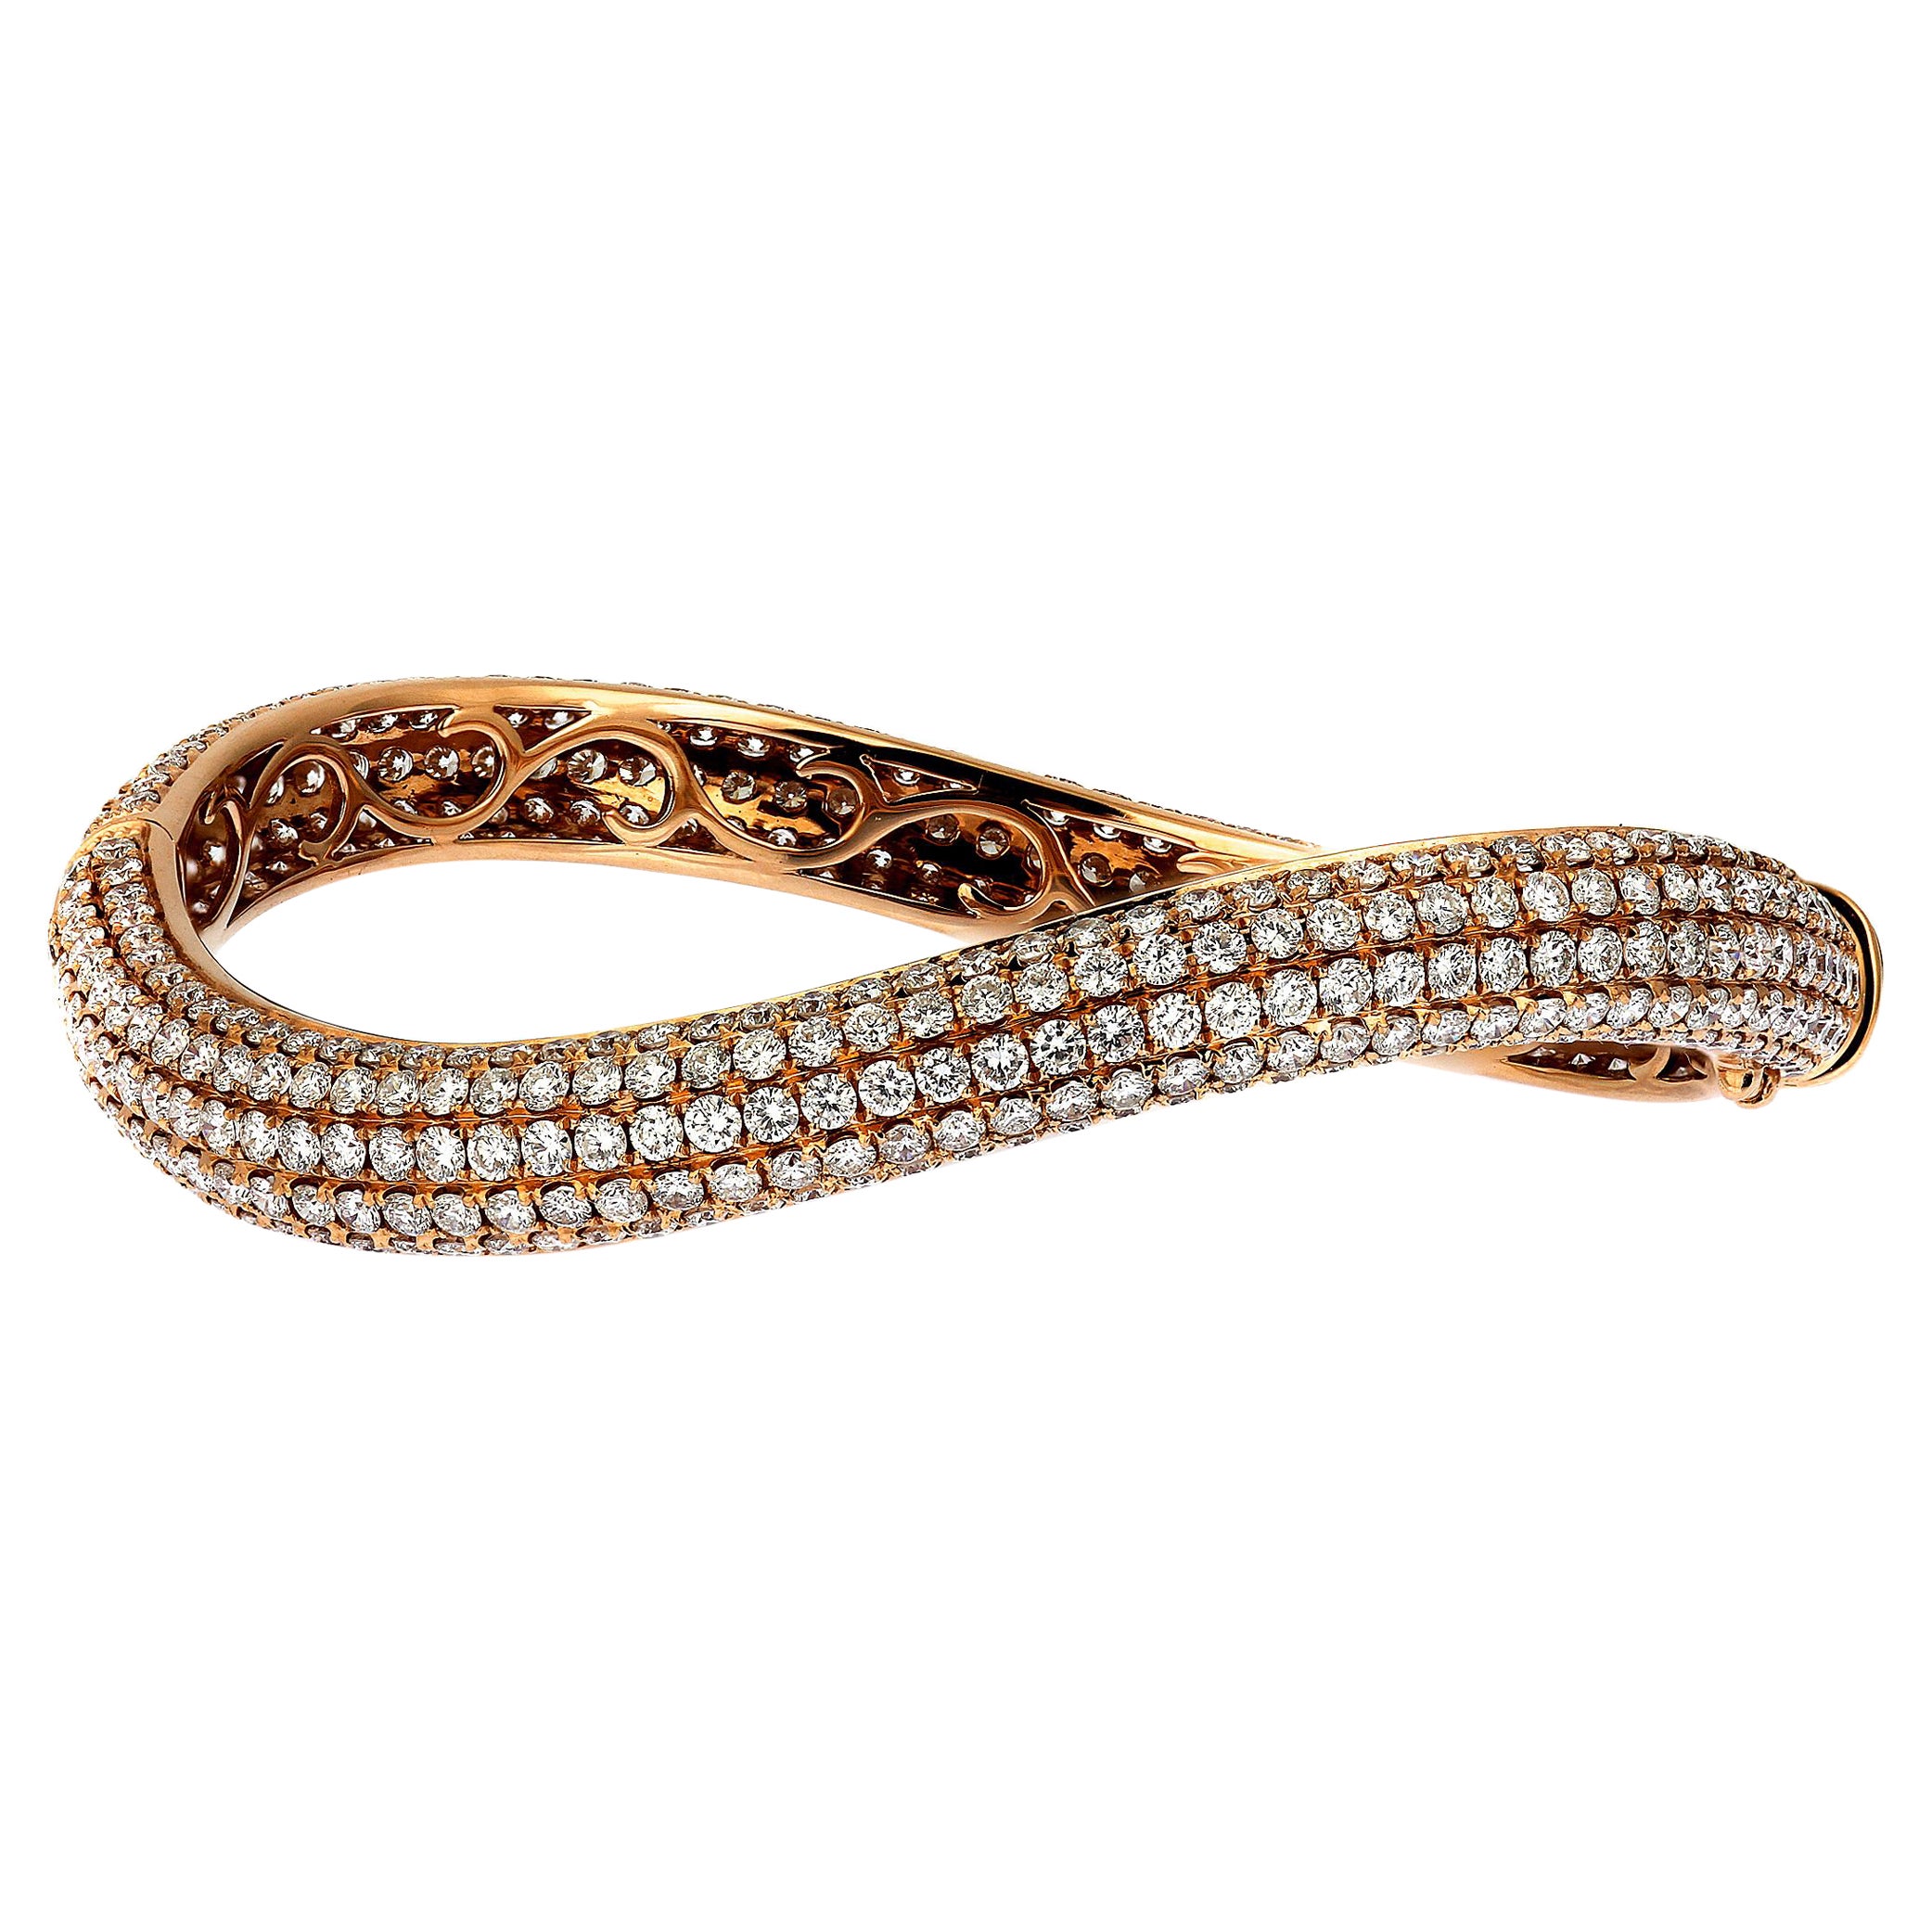 5 Row Pave Diamond Bangle of 9.7cts set in 18ct Rose Gold